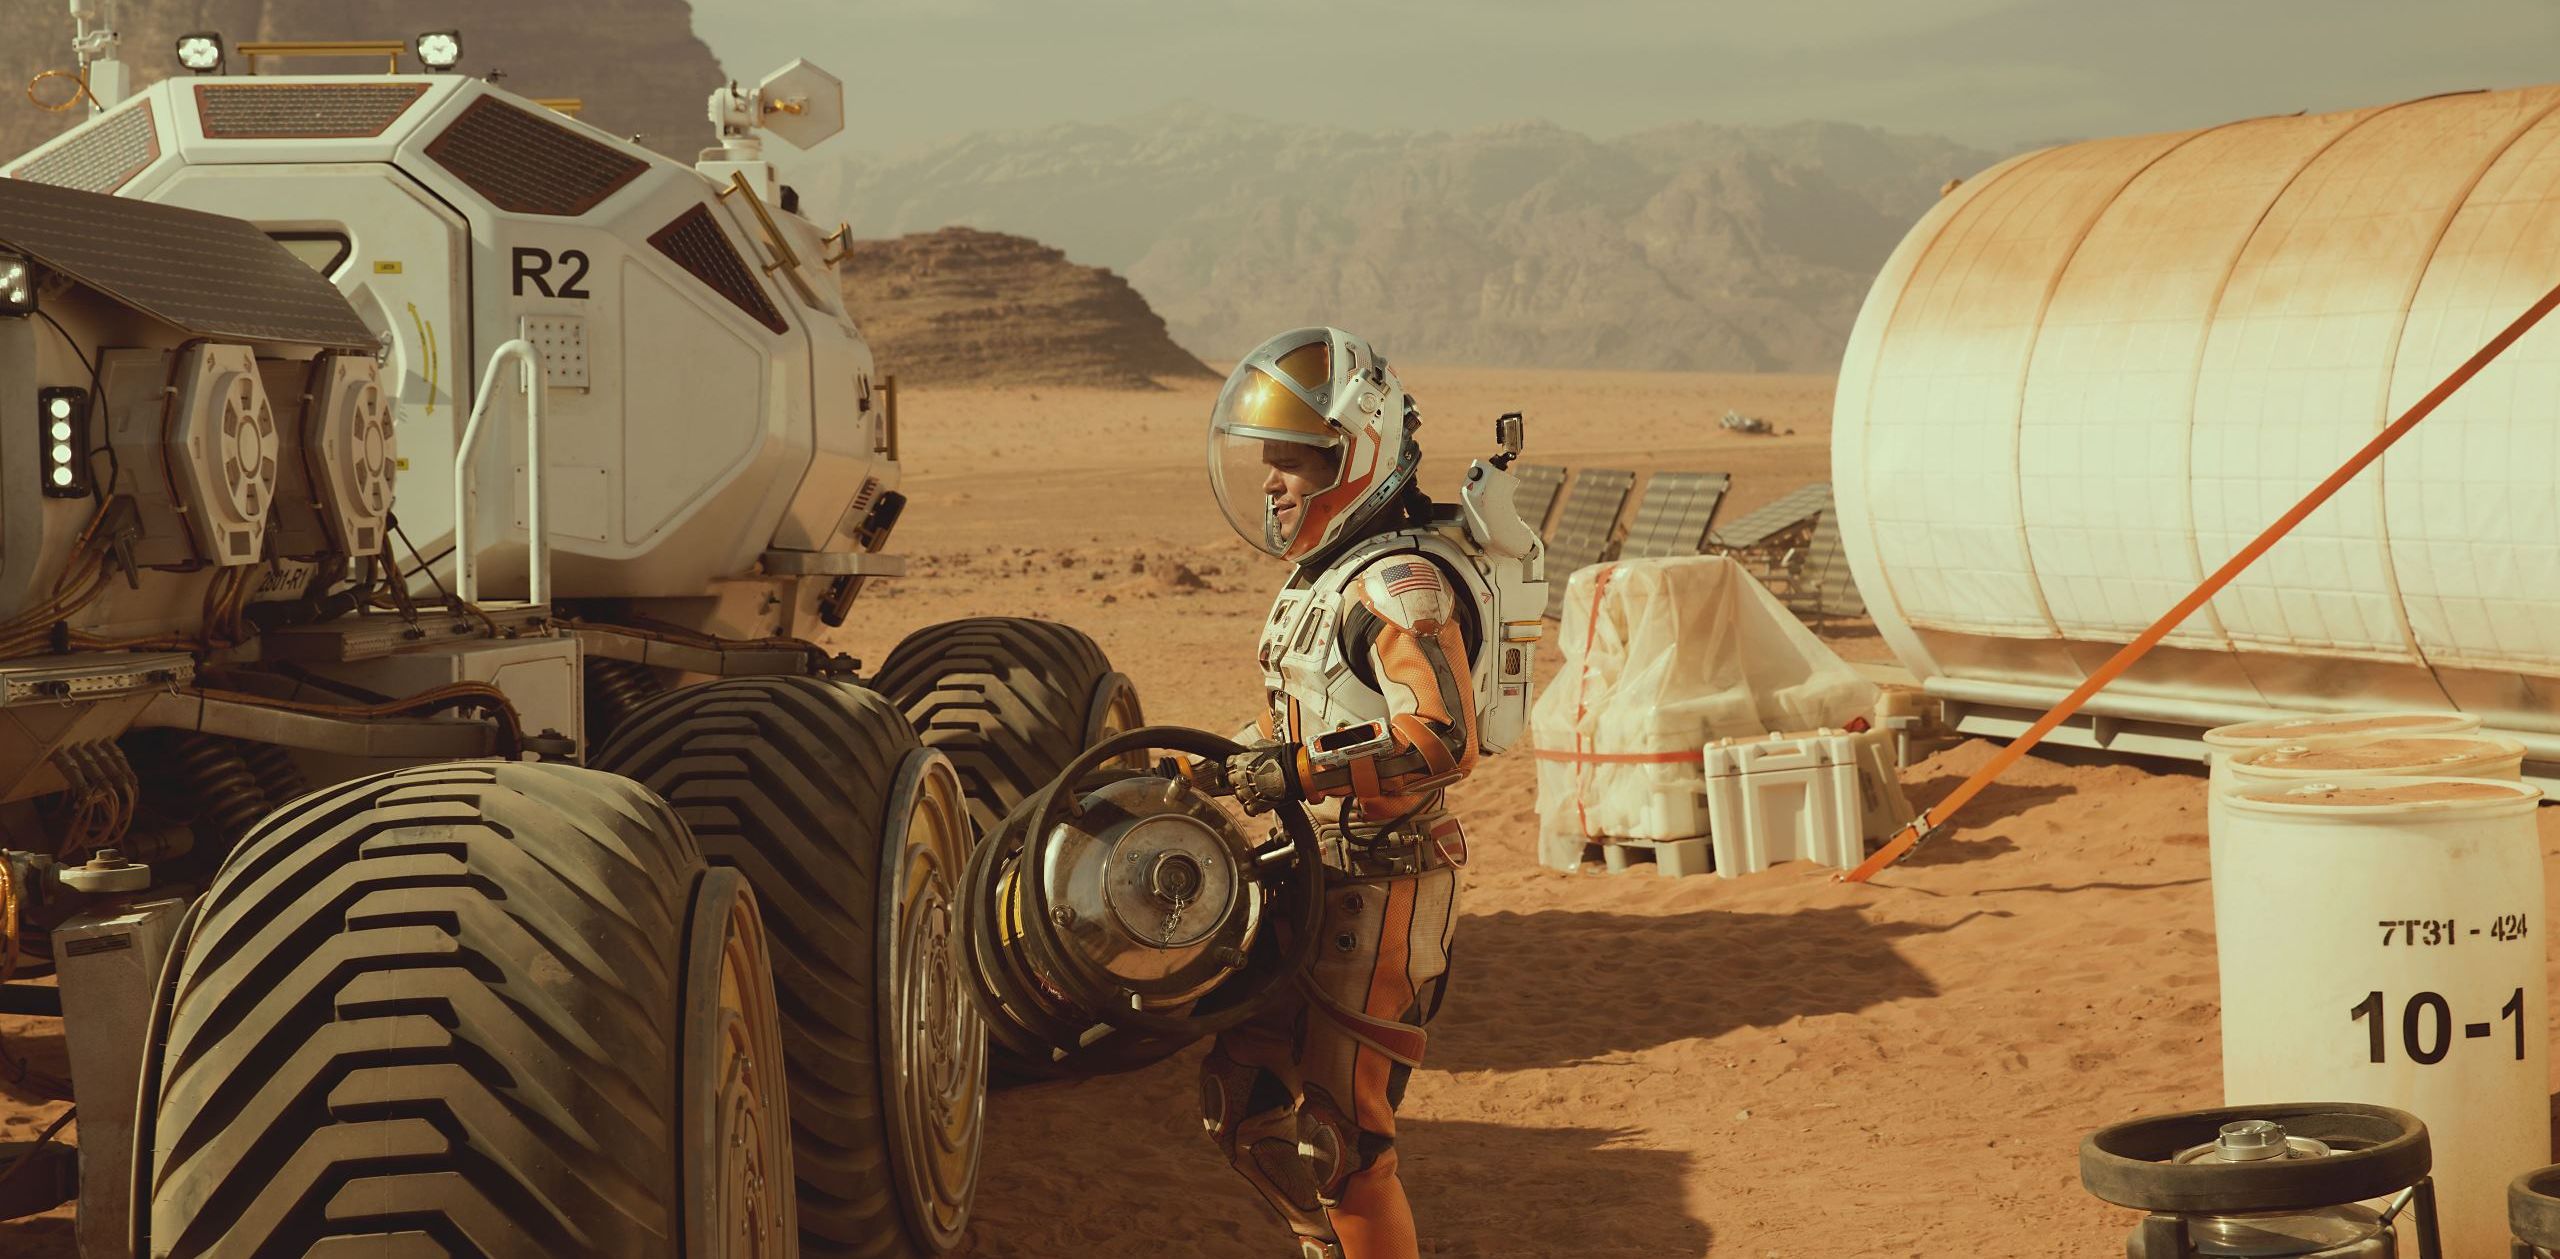 &#039;The Martian&#039; opens with $55 million, just shy of the $55.7 